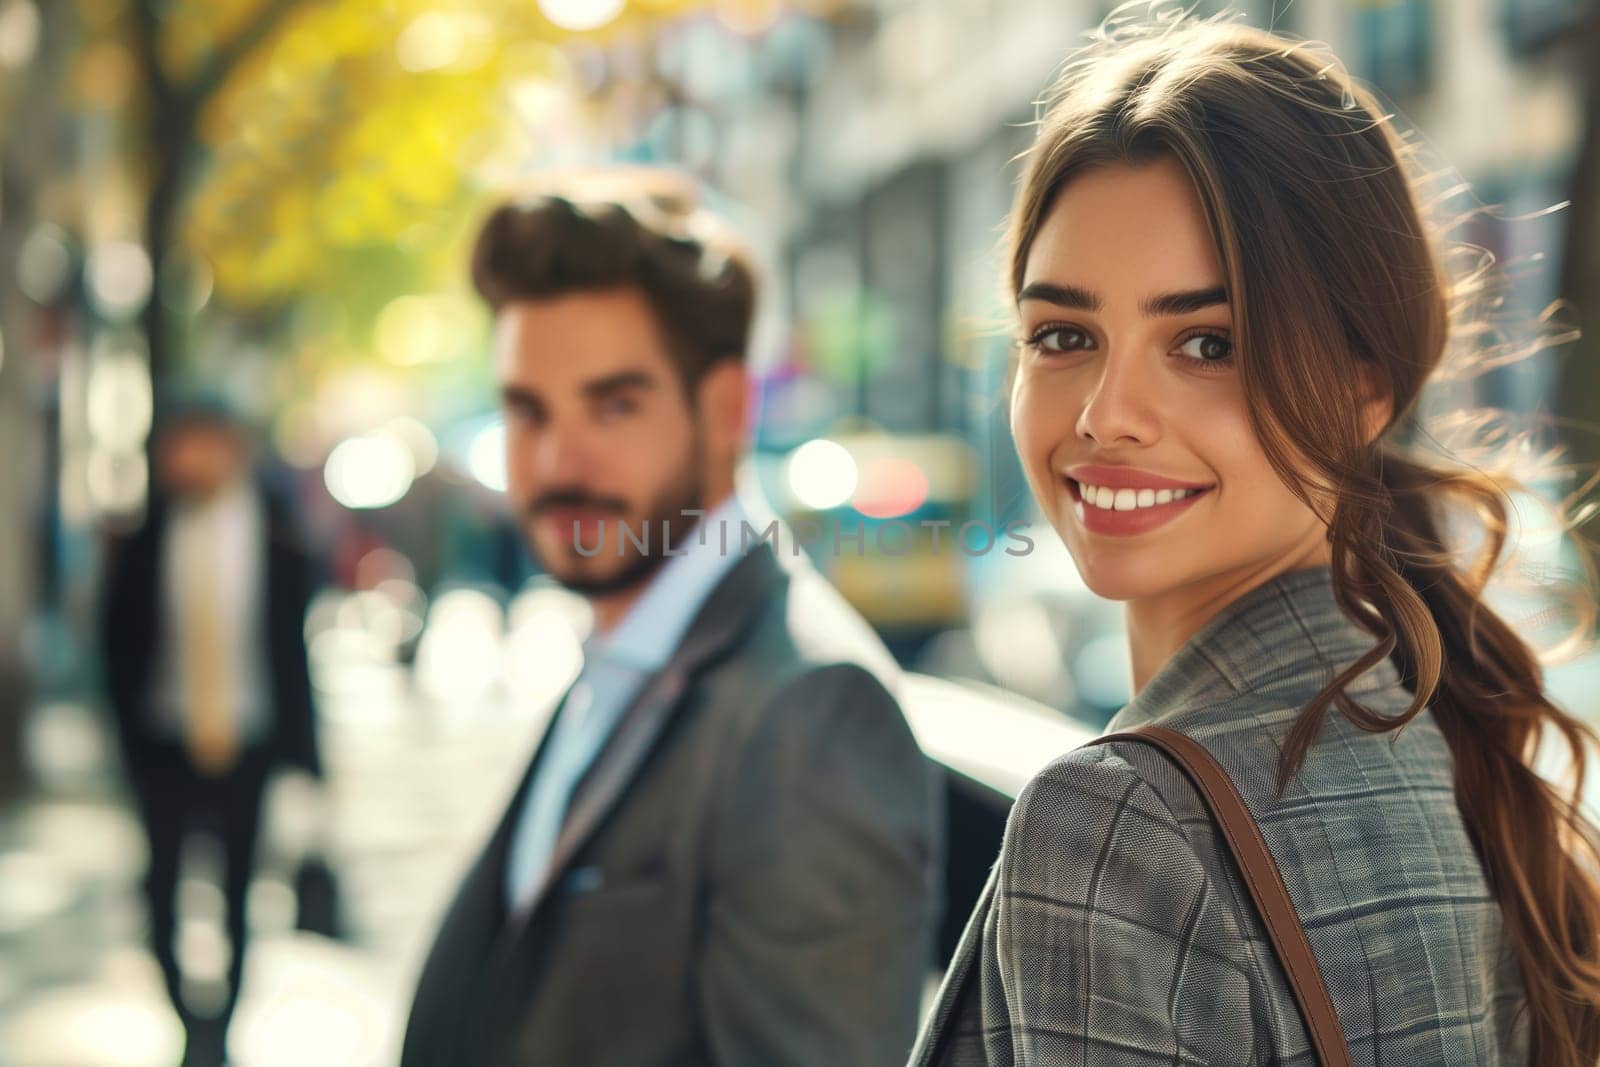 Portrait of beautiful happy smiling young woman and man in business suit, couple coworkers together on city street